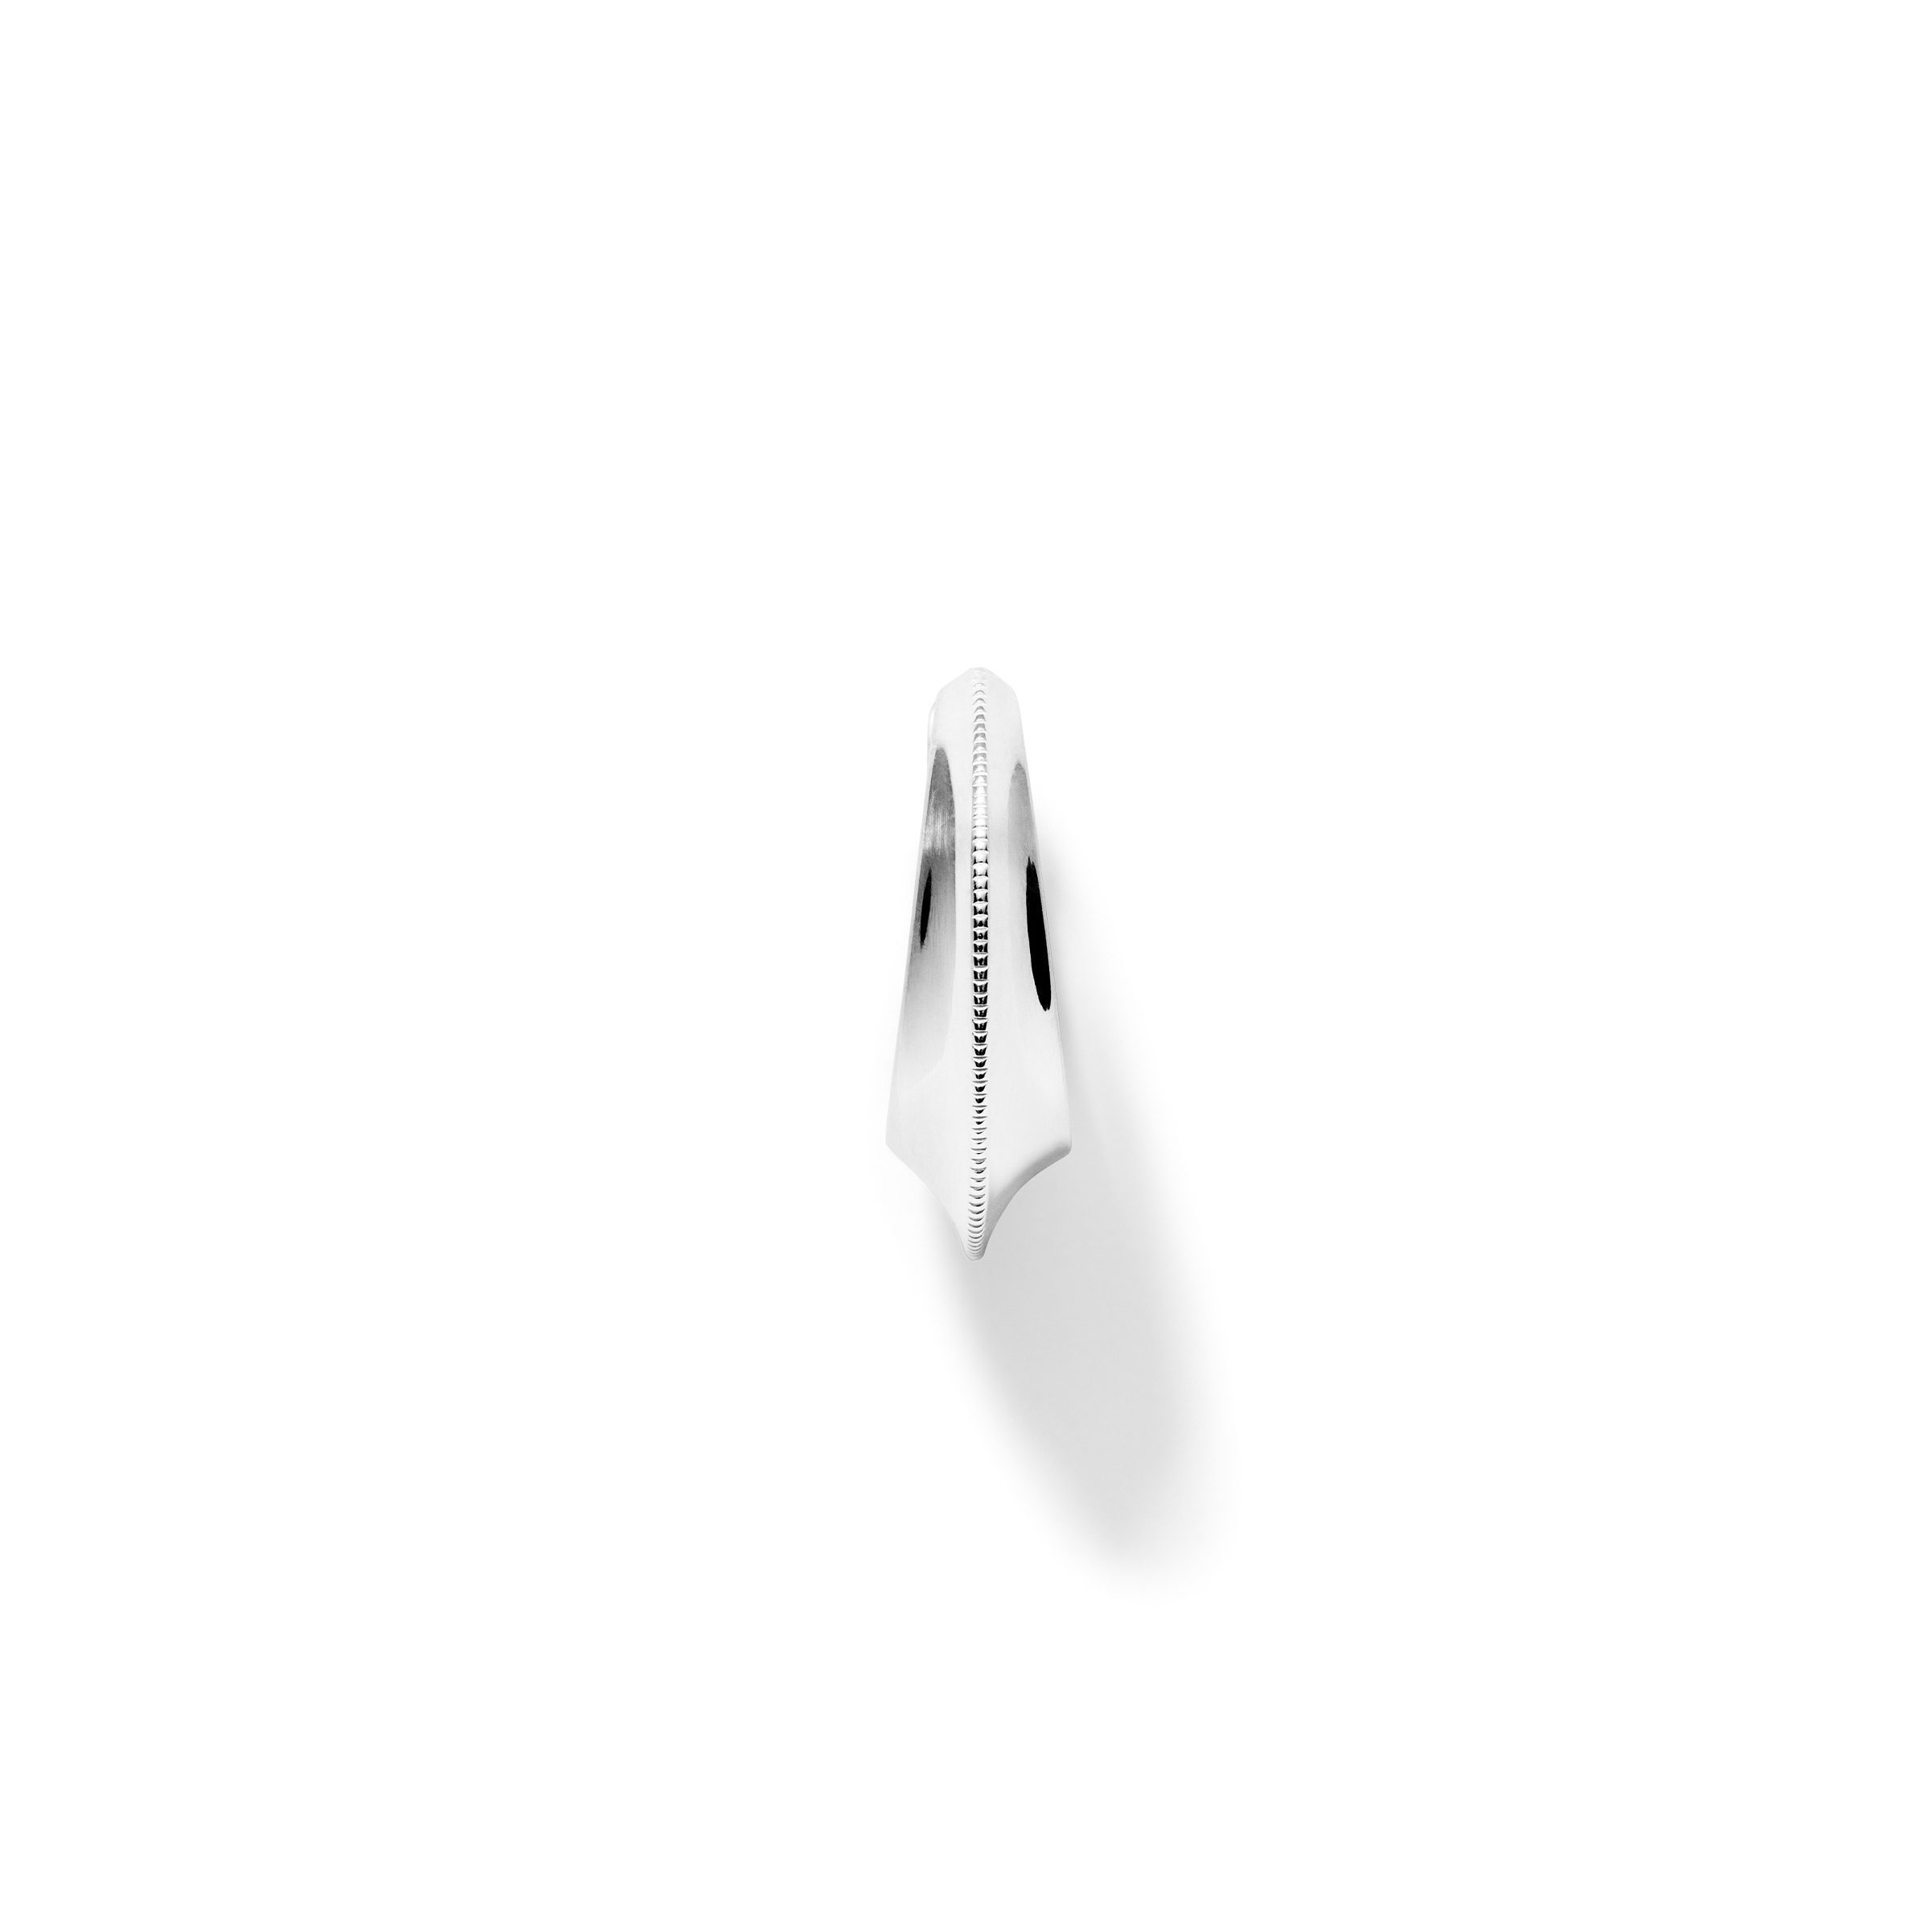 Earring<br> EROCCA high polished sterling silver